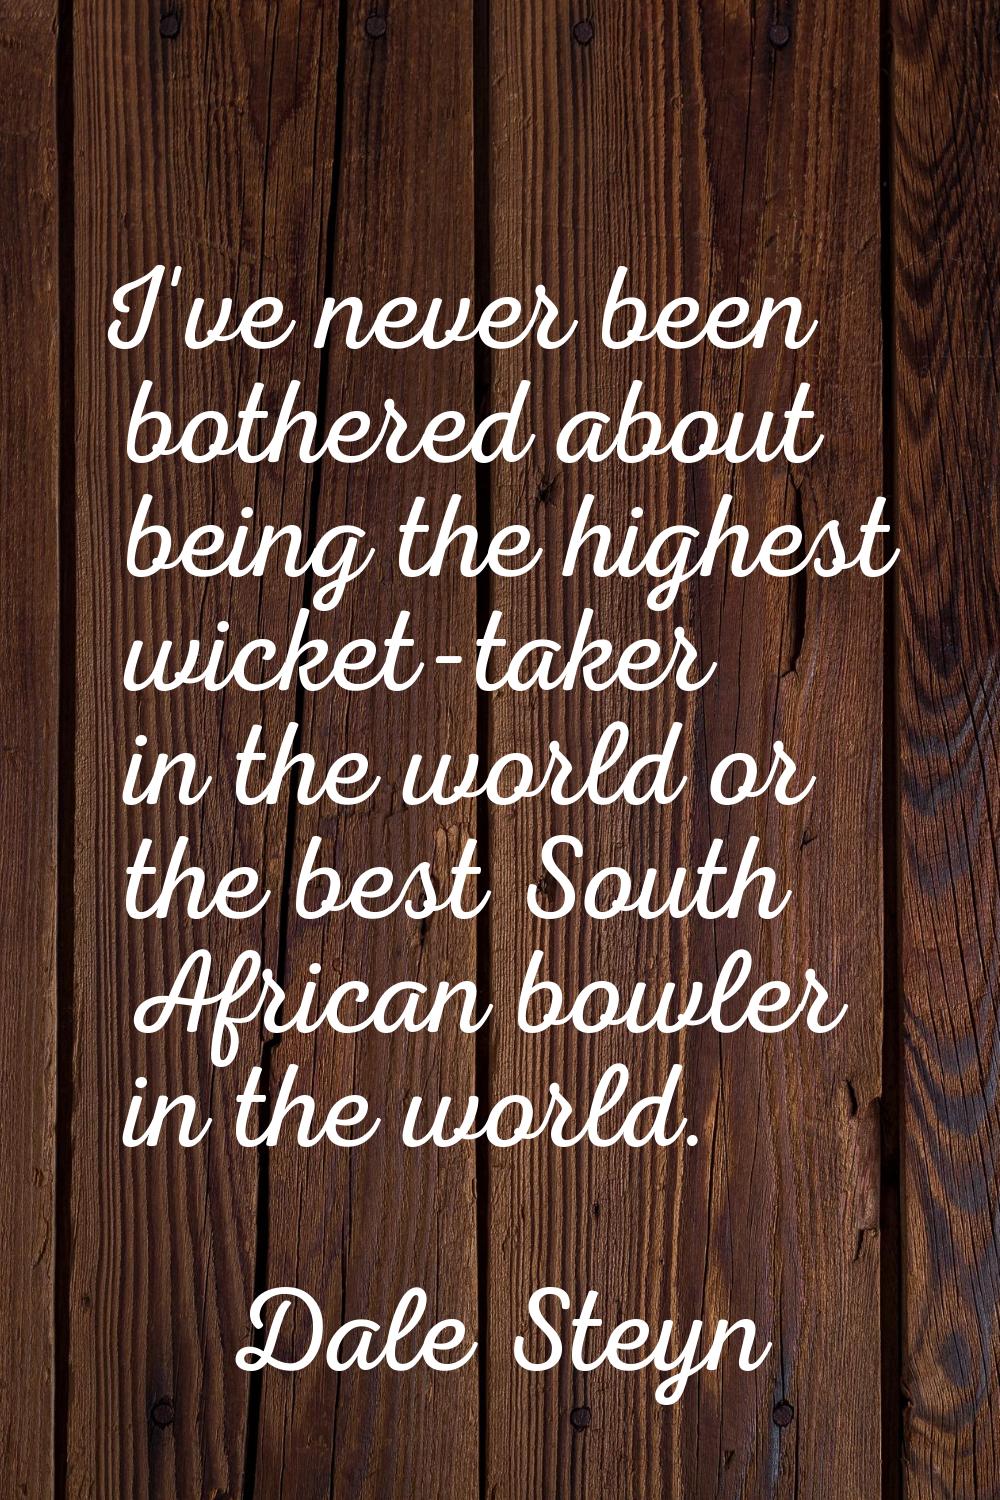 I've never been bothered about being the highest wicket-taker in the world or the best South Africa